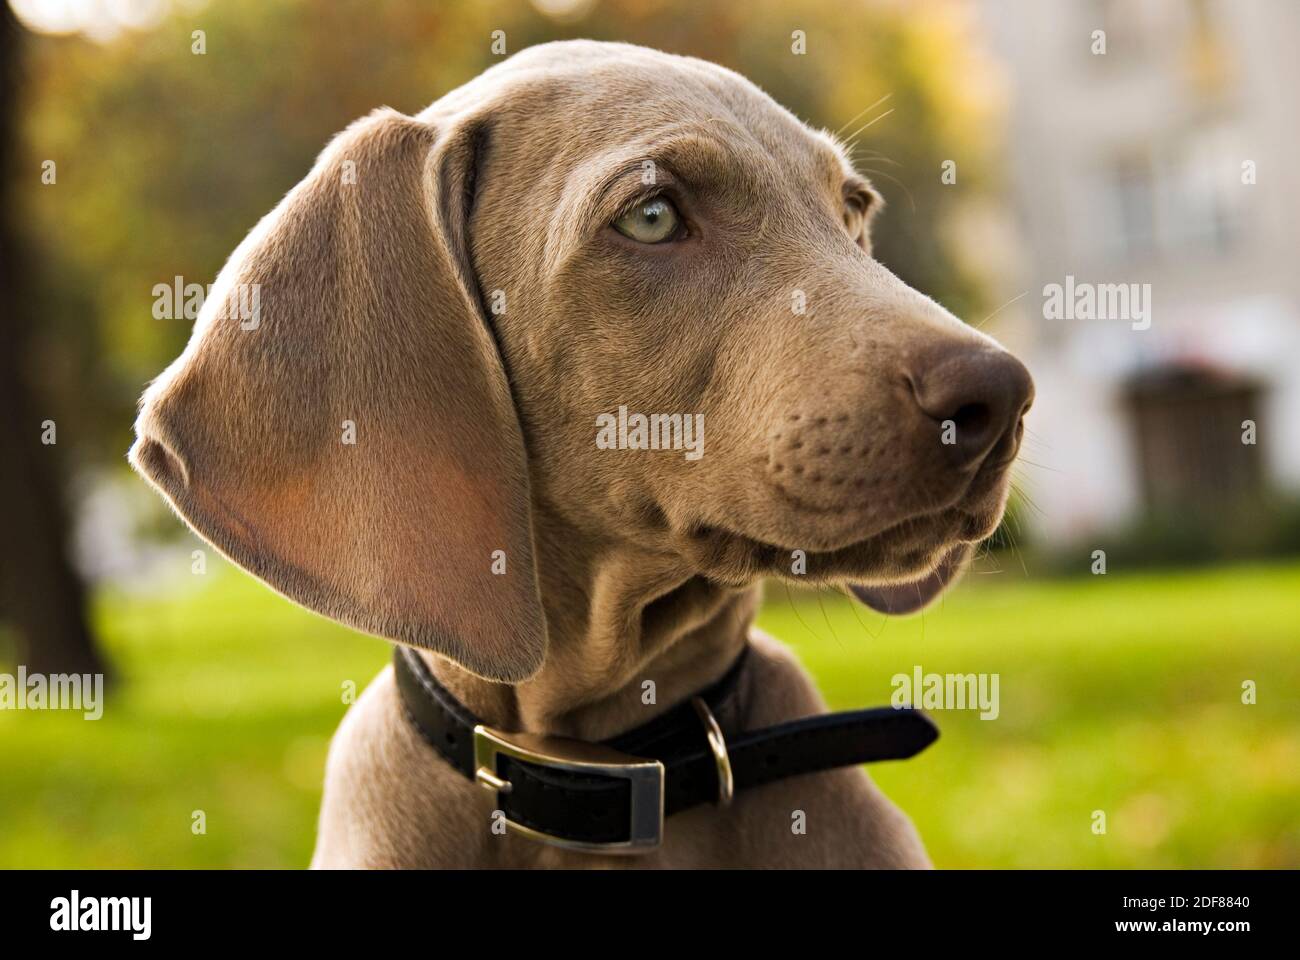 Purebred Weimaraner puppy in park. Portrait of young weimar dog with black collar on green. Lush foliage in the background. Stock Photo